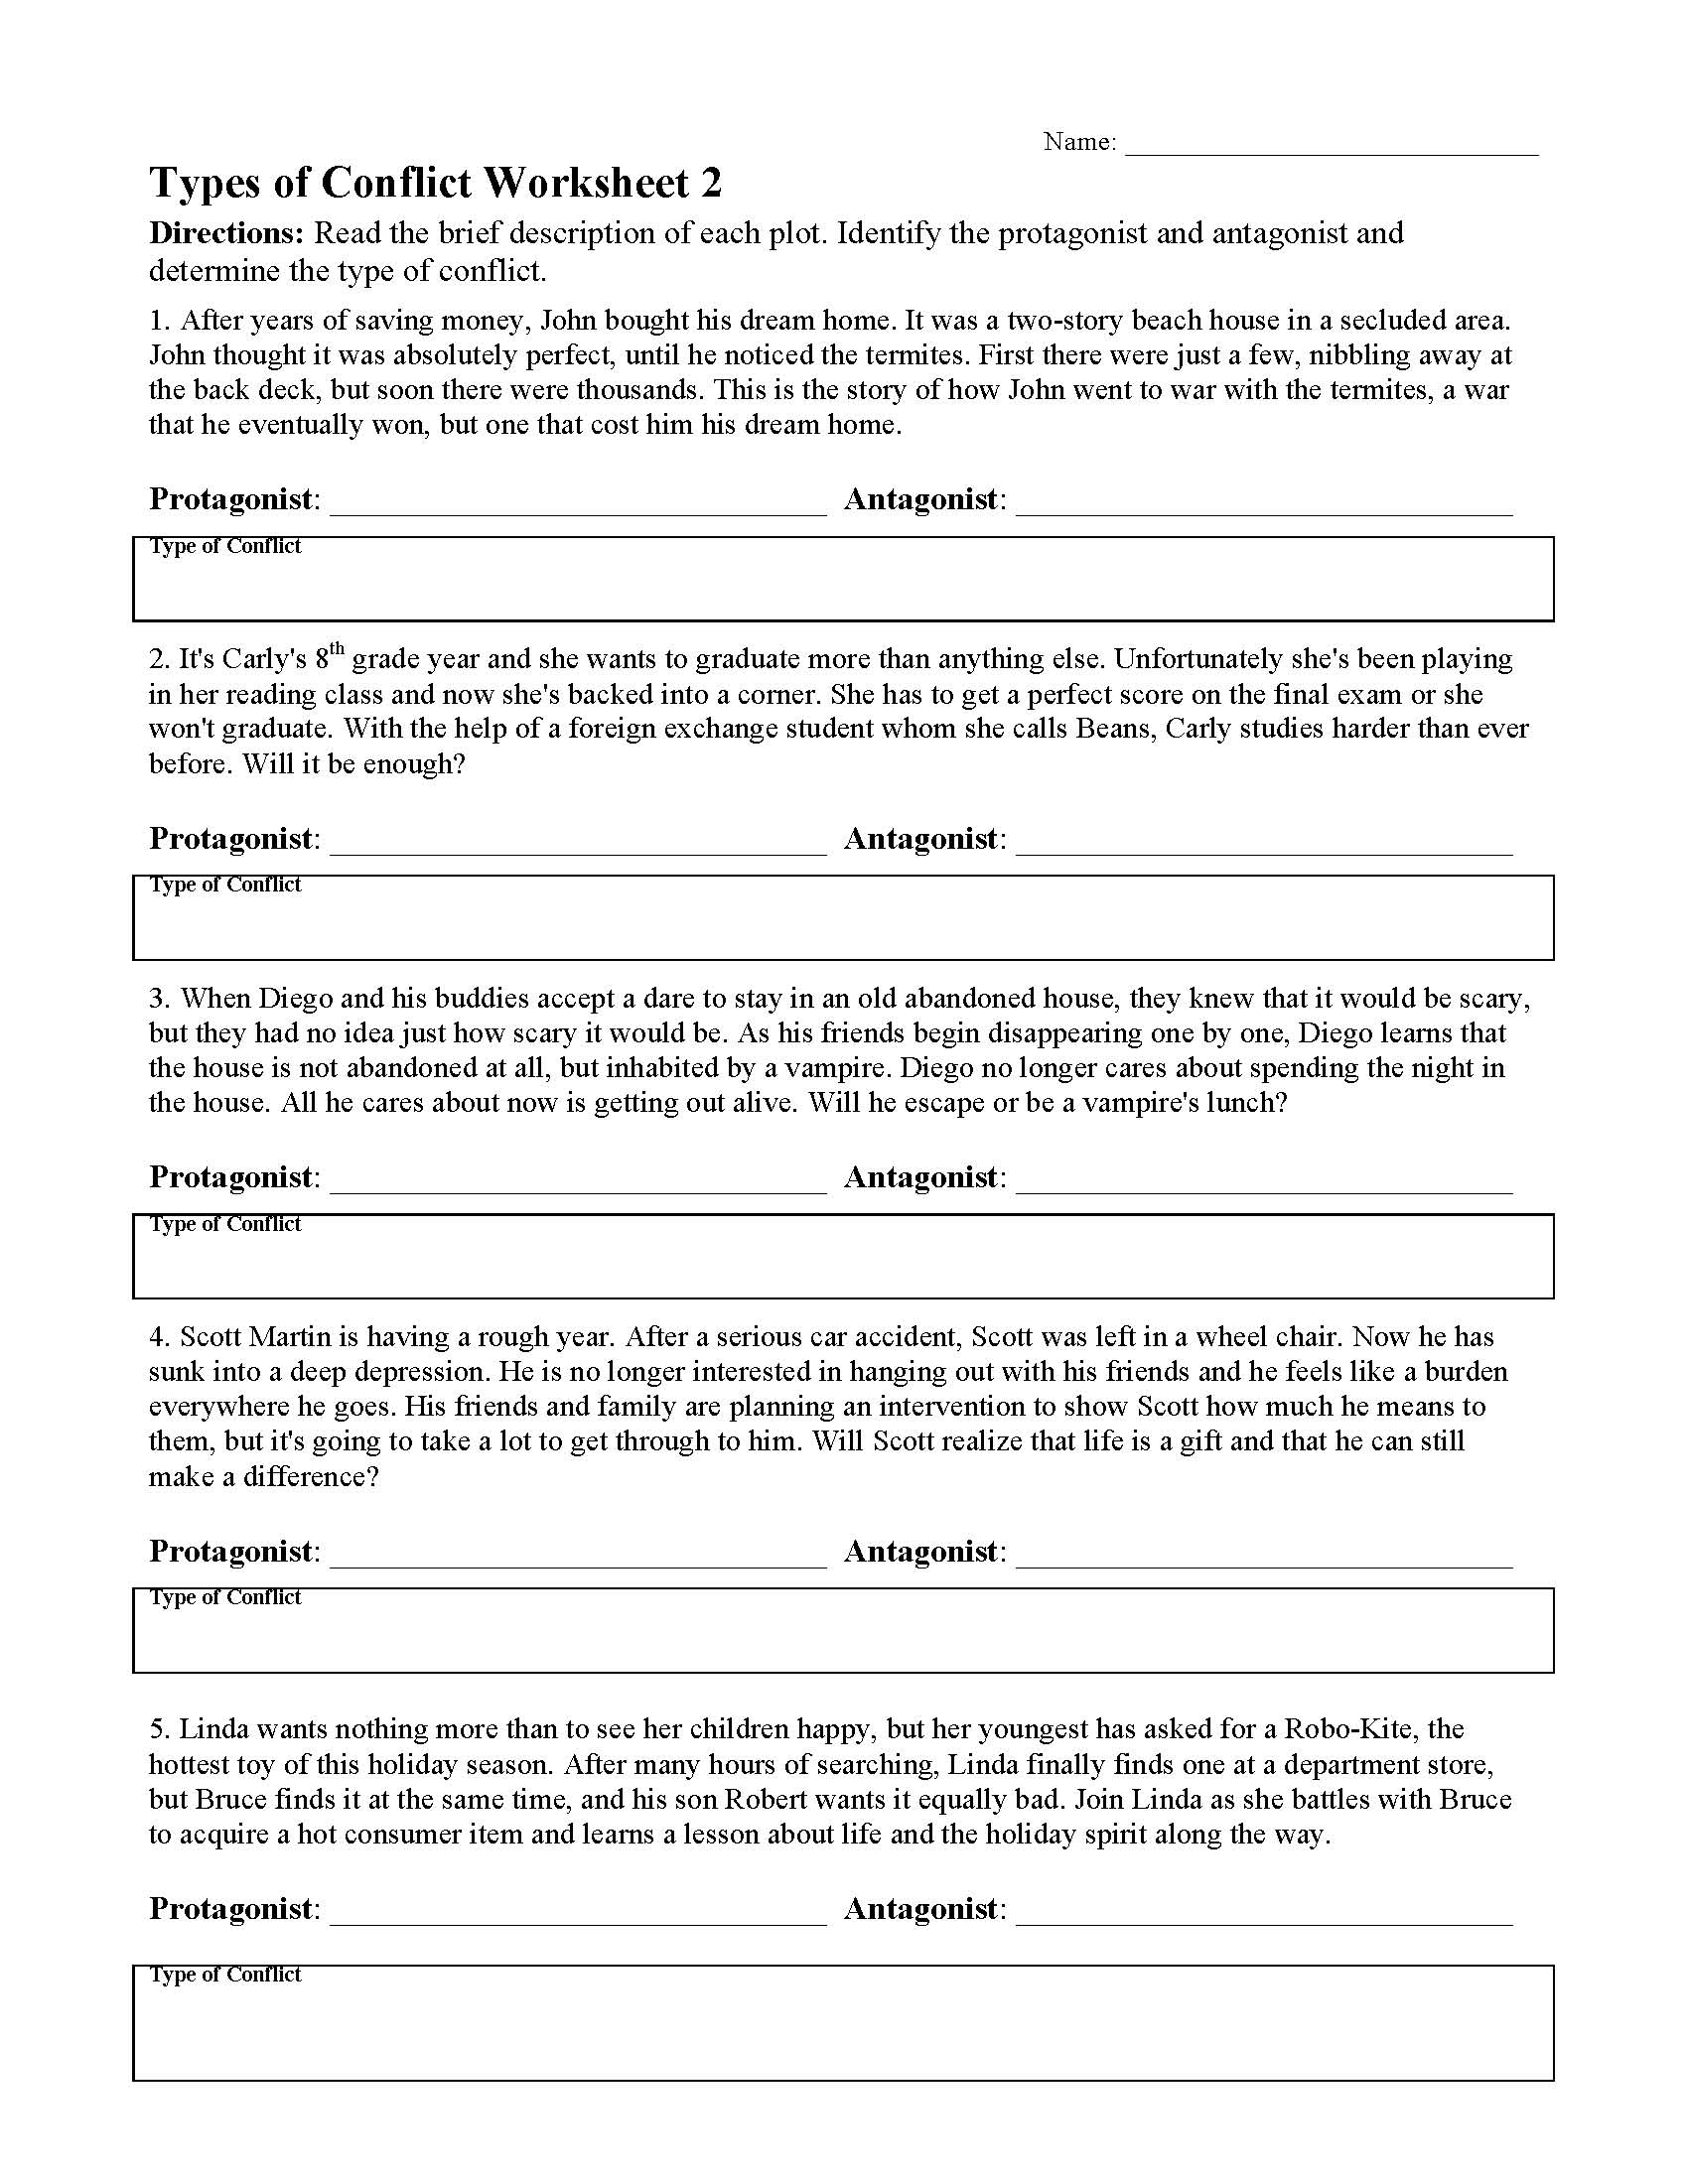 Types of Conflict Worksheet 11  Reading Activity For Protagonist And Antagonist Worksheet